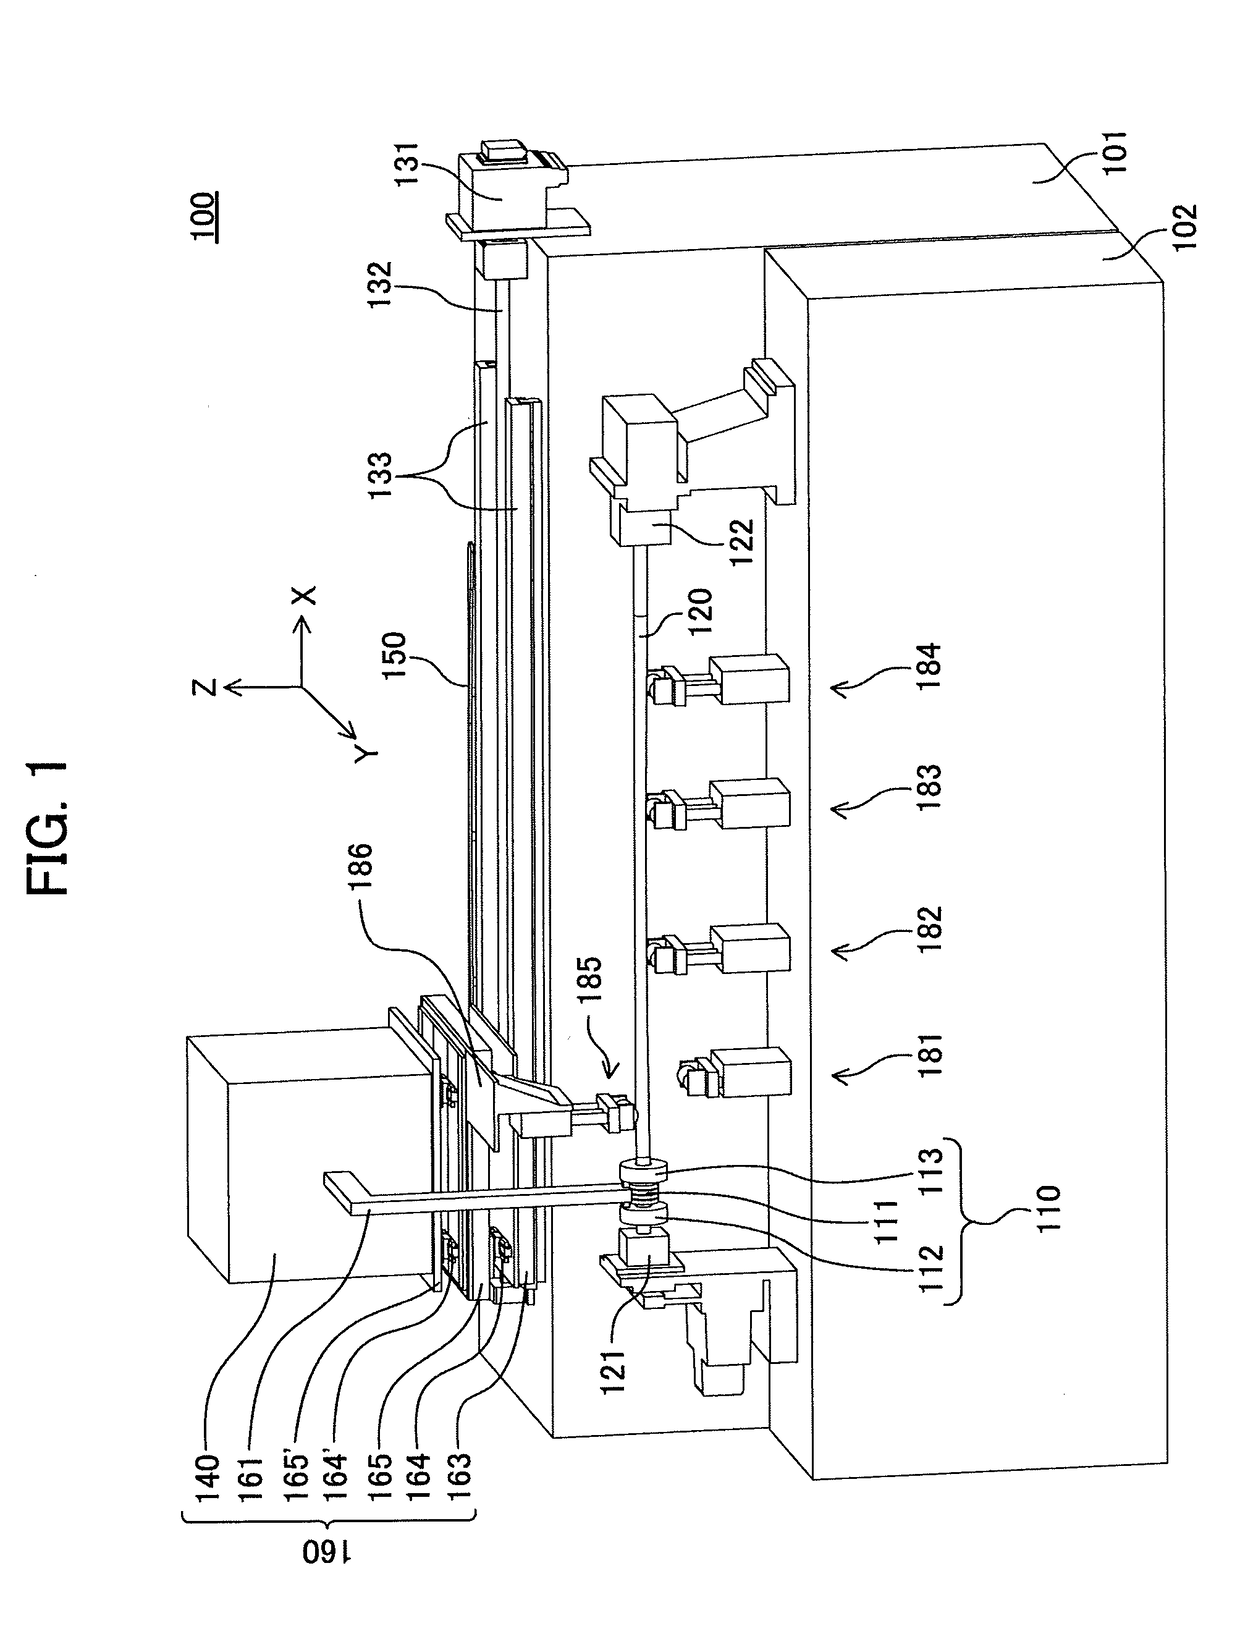 Hardening apparatus for a long member, and a hardening method for a long member